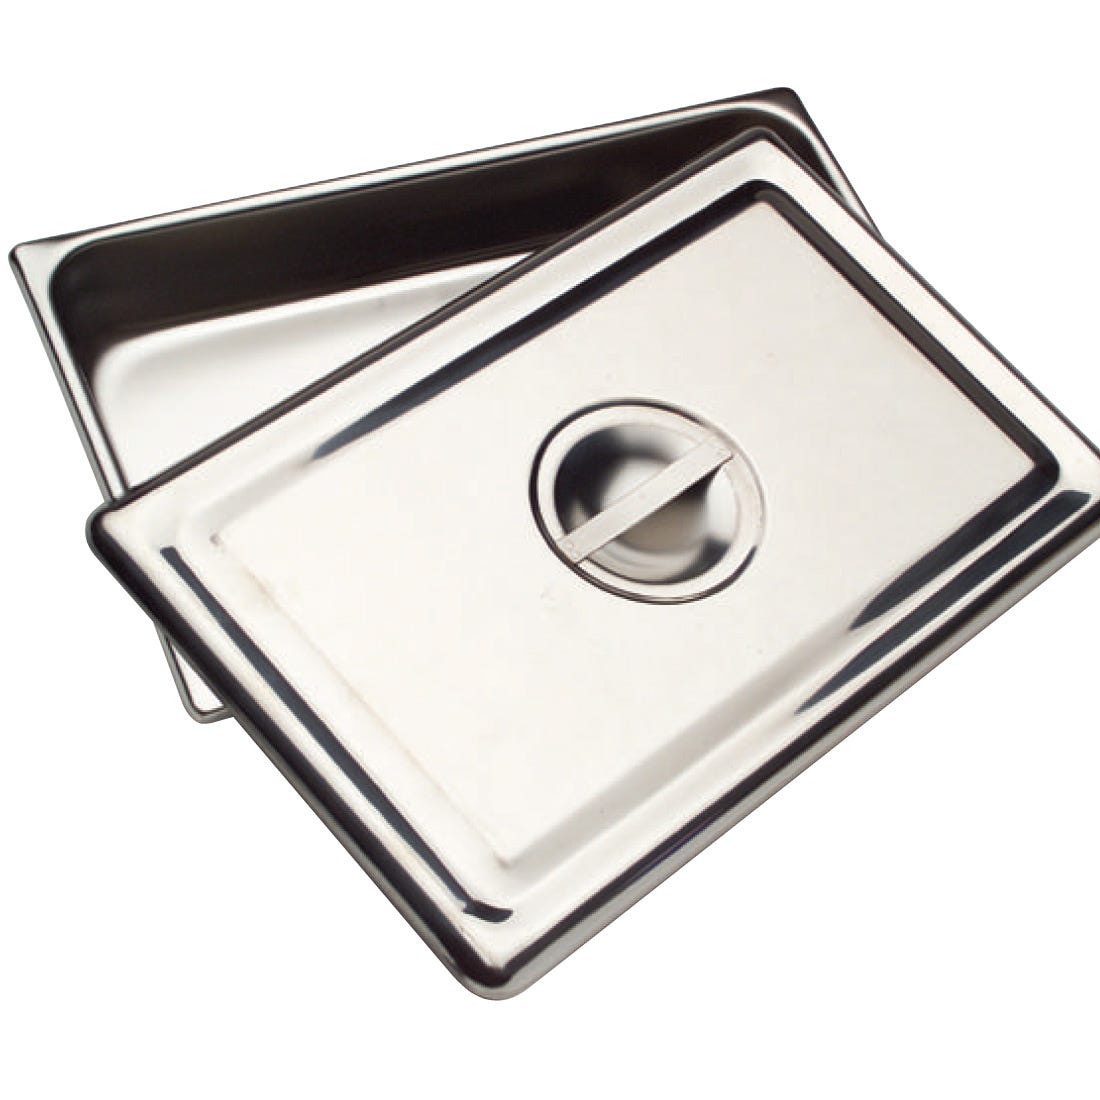 Instrument Tray with recessed handle cover, 12-1/4" x 7-5/8" x 2-1/8"